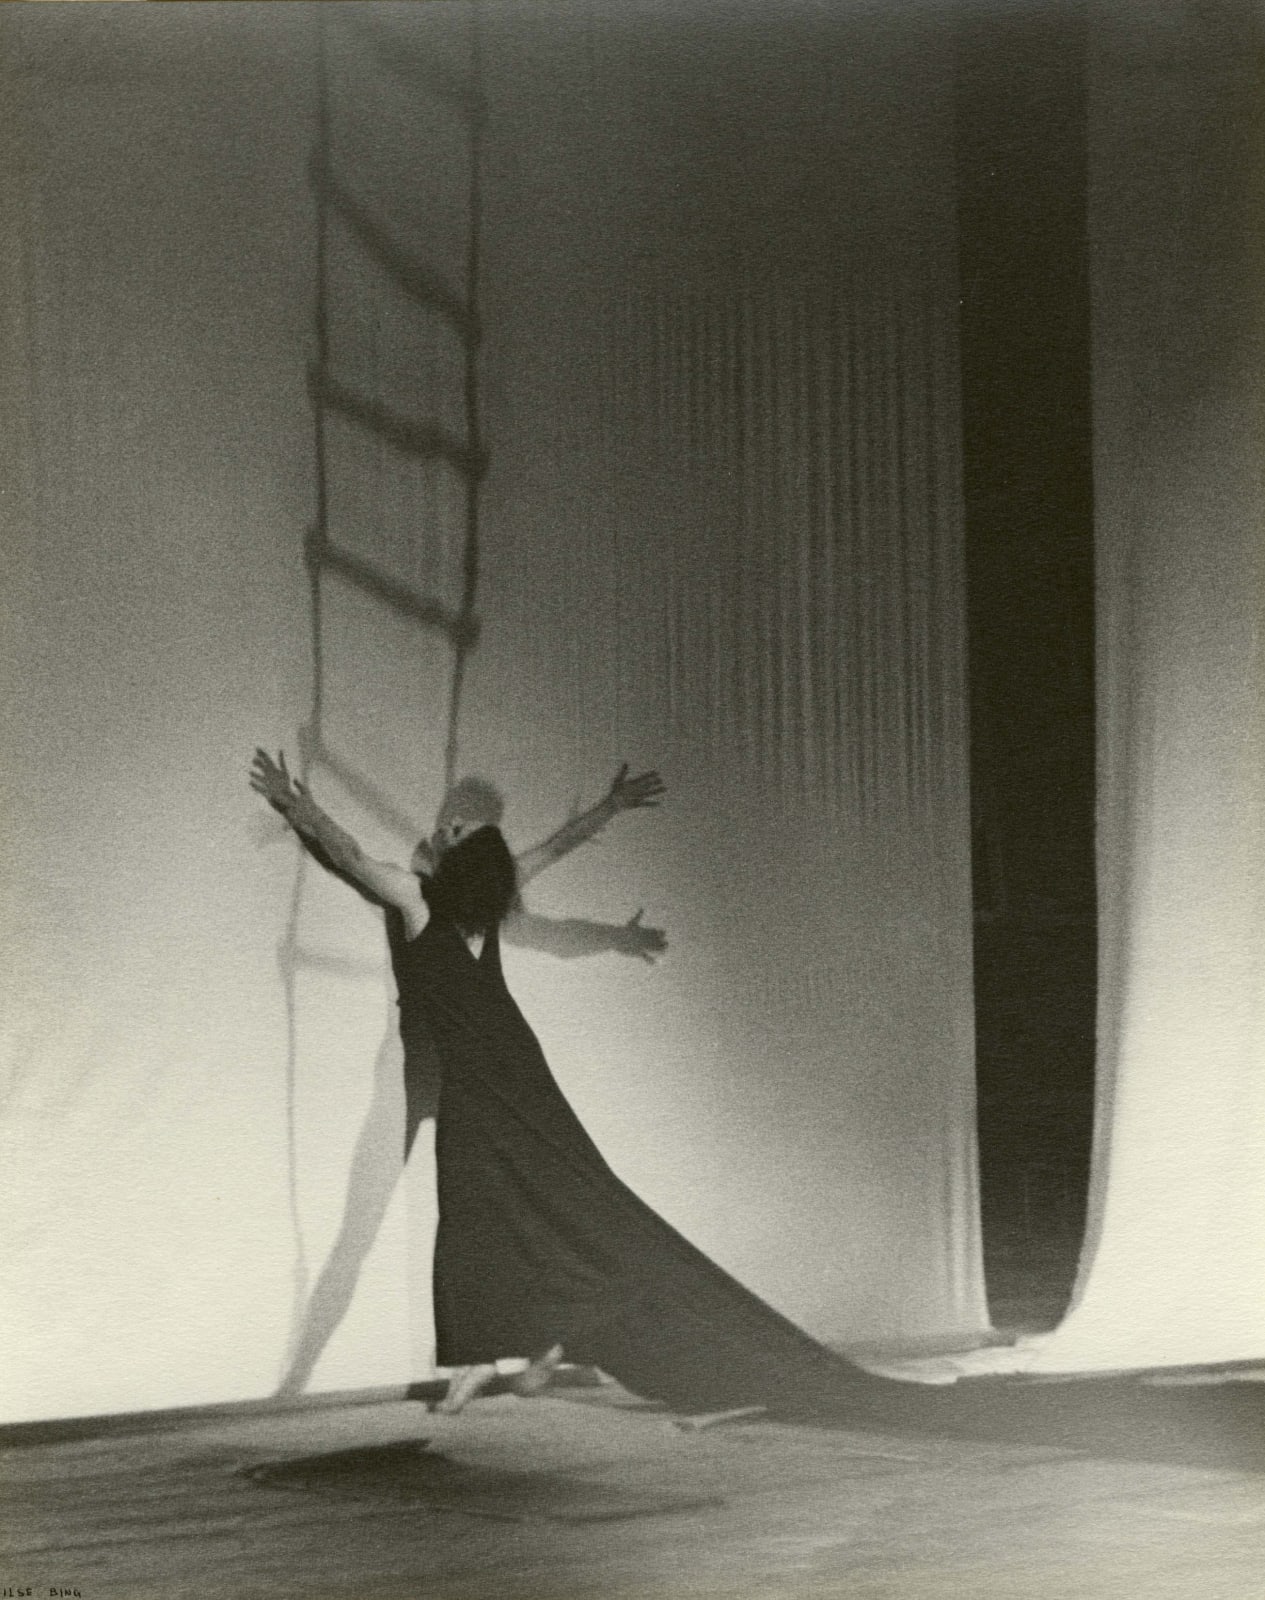 Ilse Bing photograph of woman on stage and man behind transparent sheet, embracing